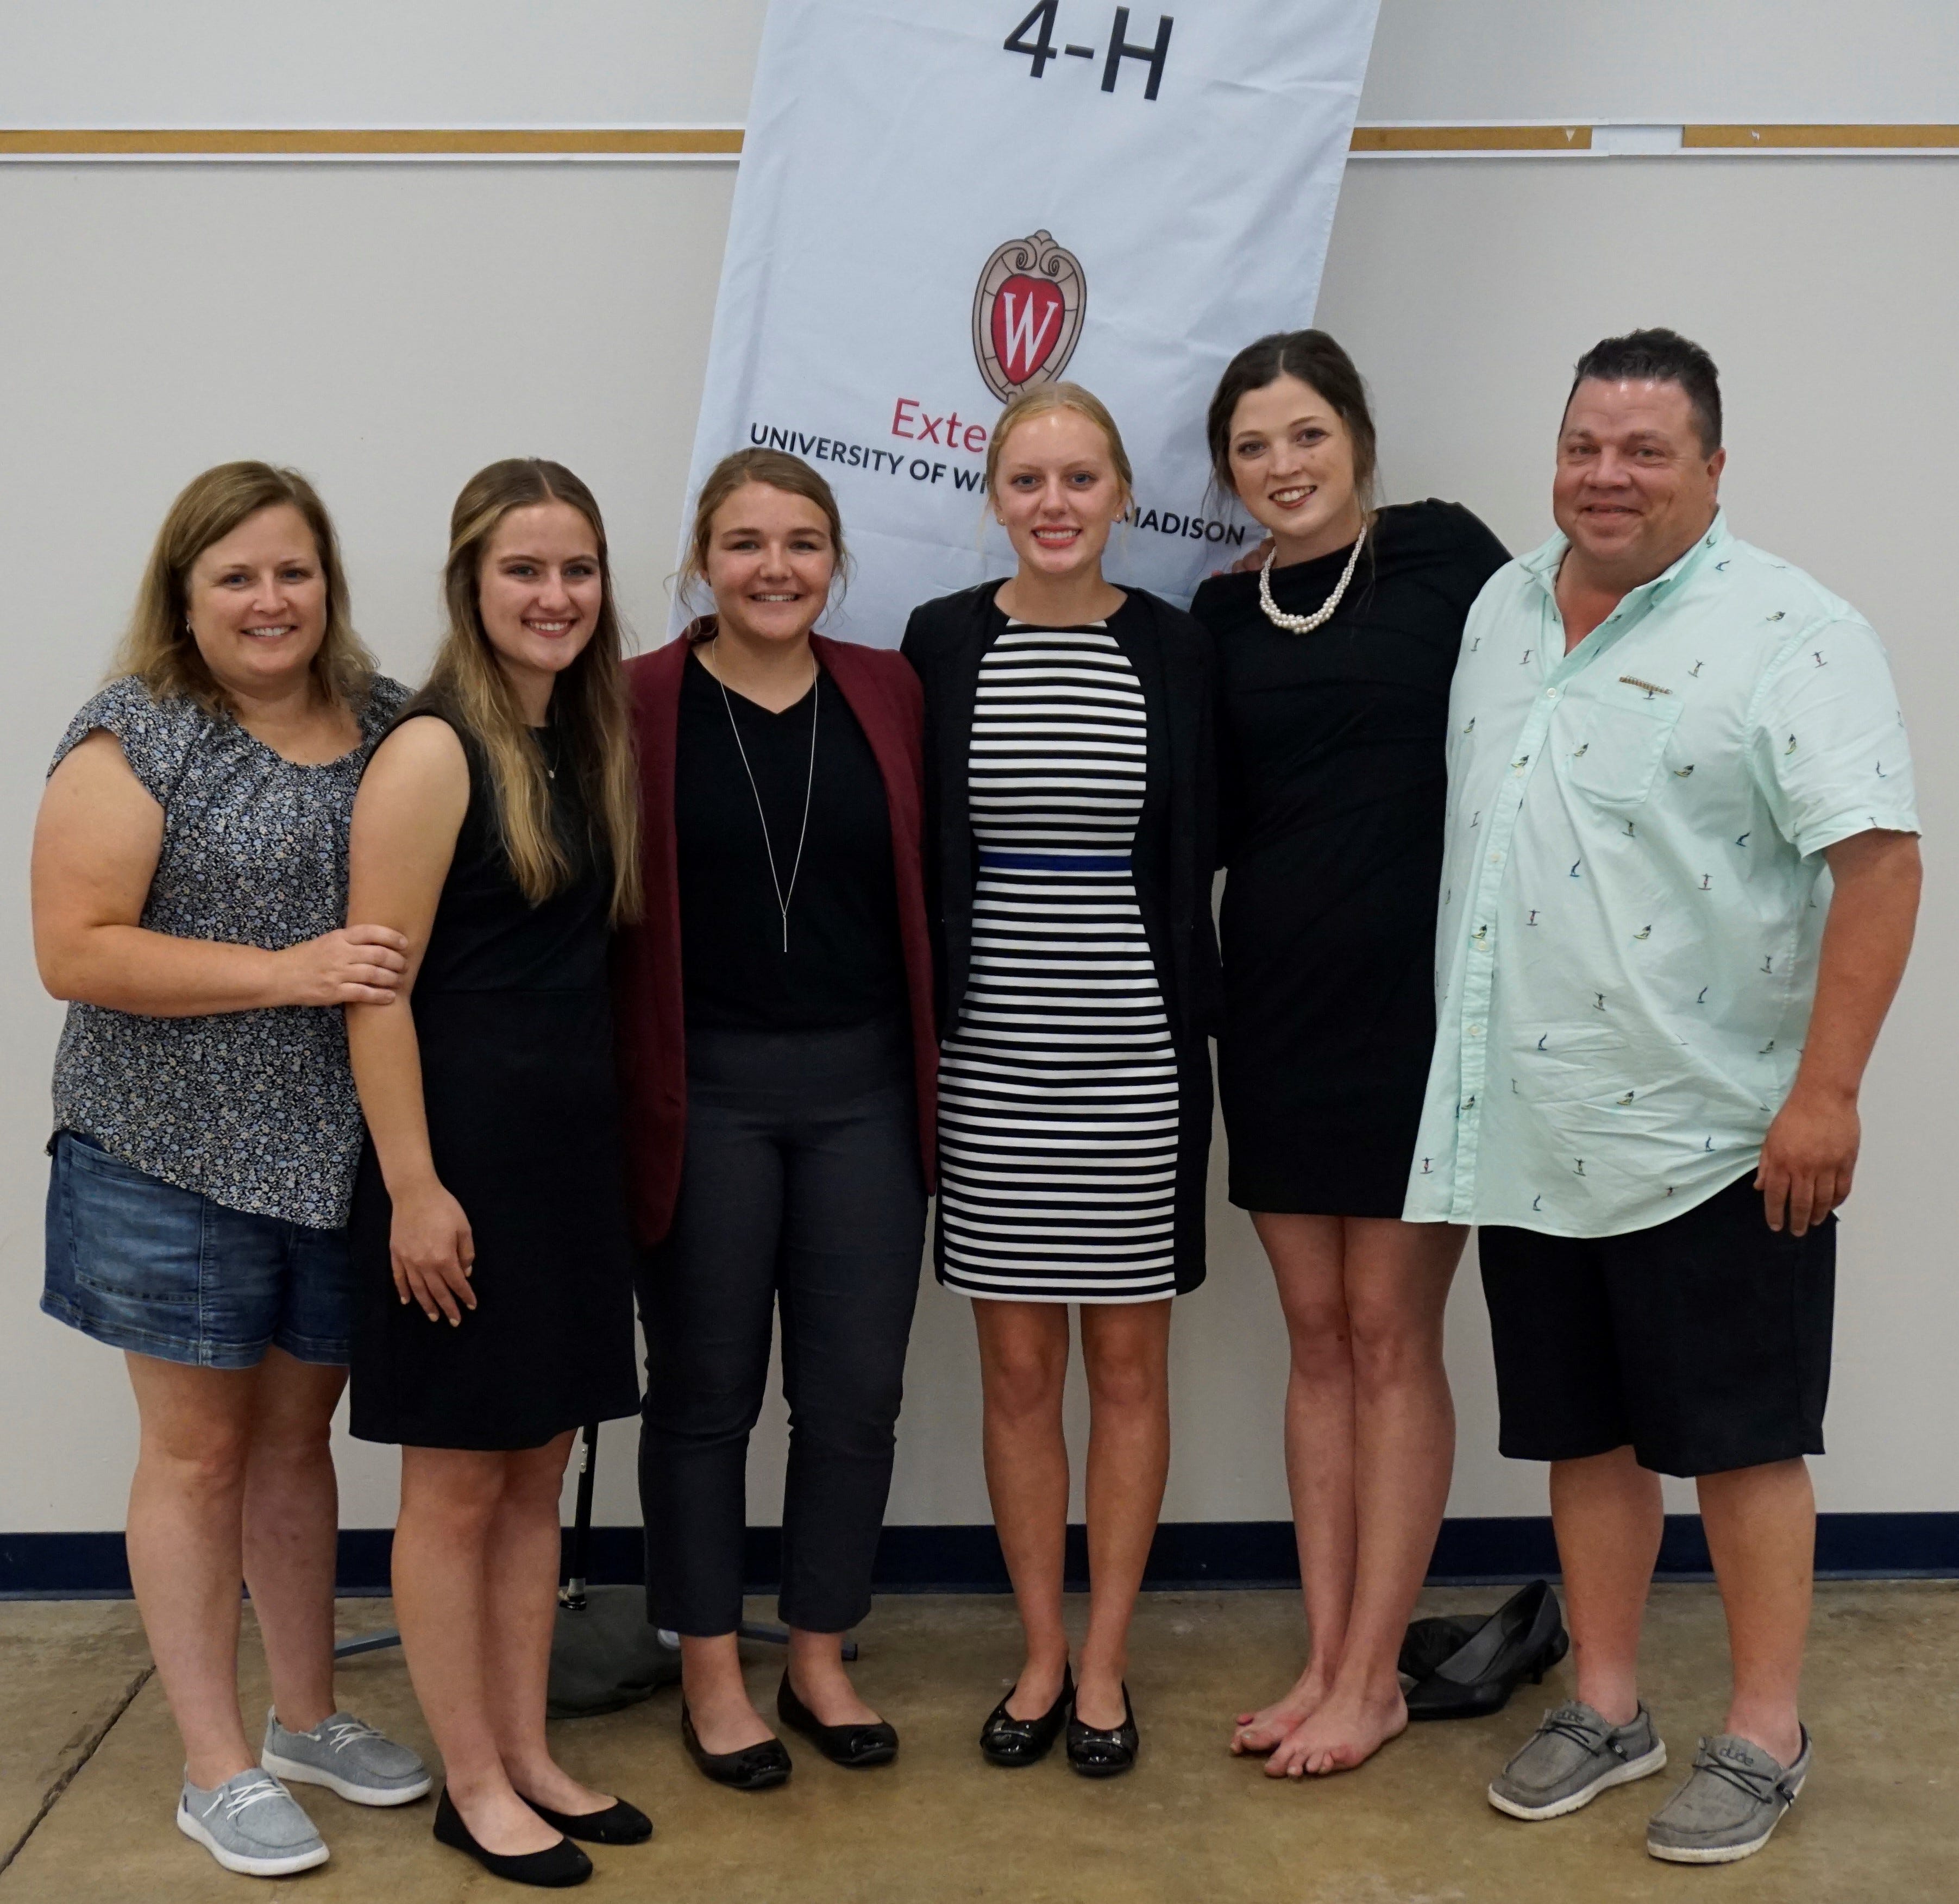 The Manitowoc County Senior Dairy Judging Team advanced to the National 4-H Dairy Cattle Judging contest next month at World Dairy Expo by finishing first place at the State 4-H Senior Dairy Judging Contest on August 9, 2021. Coached by Angie Ulness, far left, and Paul Siemers, far right, are Clarissa Ulness, second from left, Emma Vos, Jenna Gries, and Lauren Siemers.